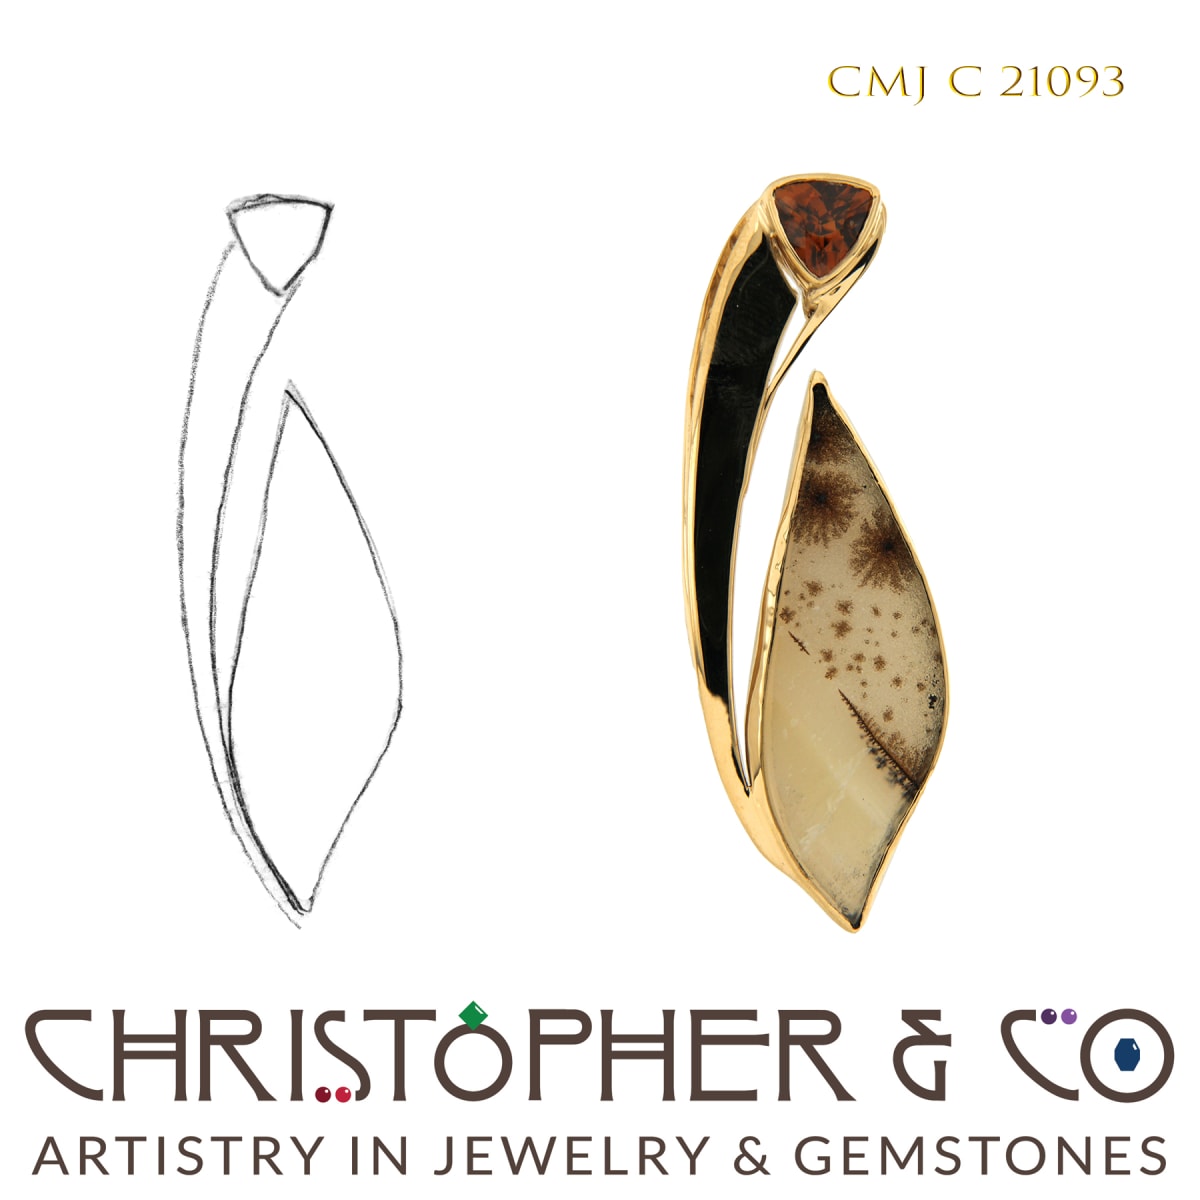 CMJ C 21093 Gold Pendant by Christopher M. Jupp  Image: CMJ C 21093 Gold Pendant set with Spotted Drusy and Zircon by Christopher M. Jupp.